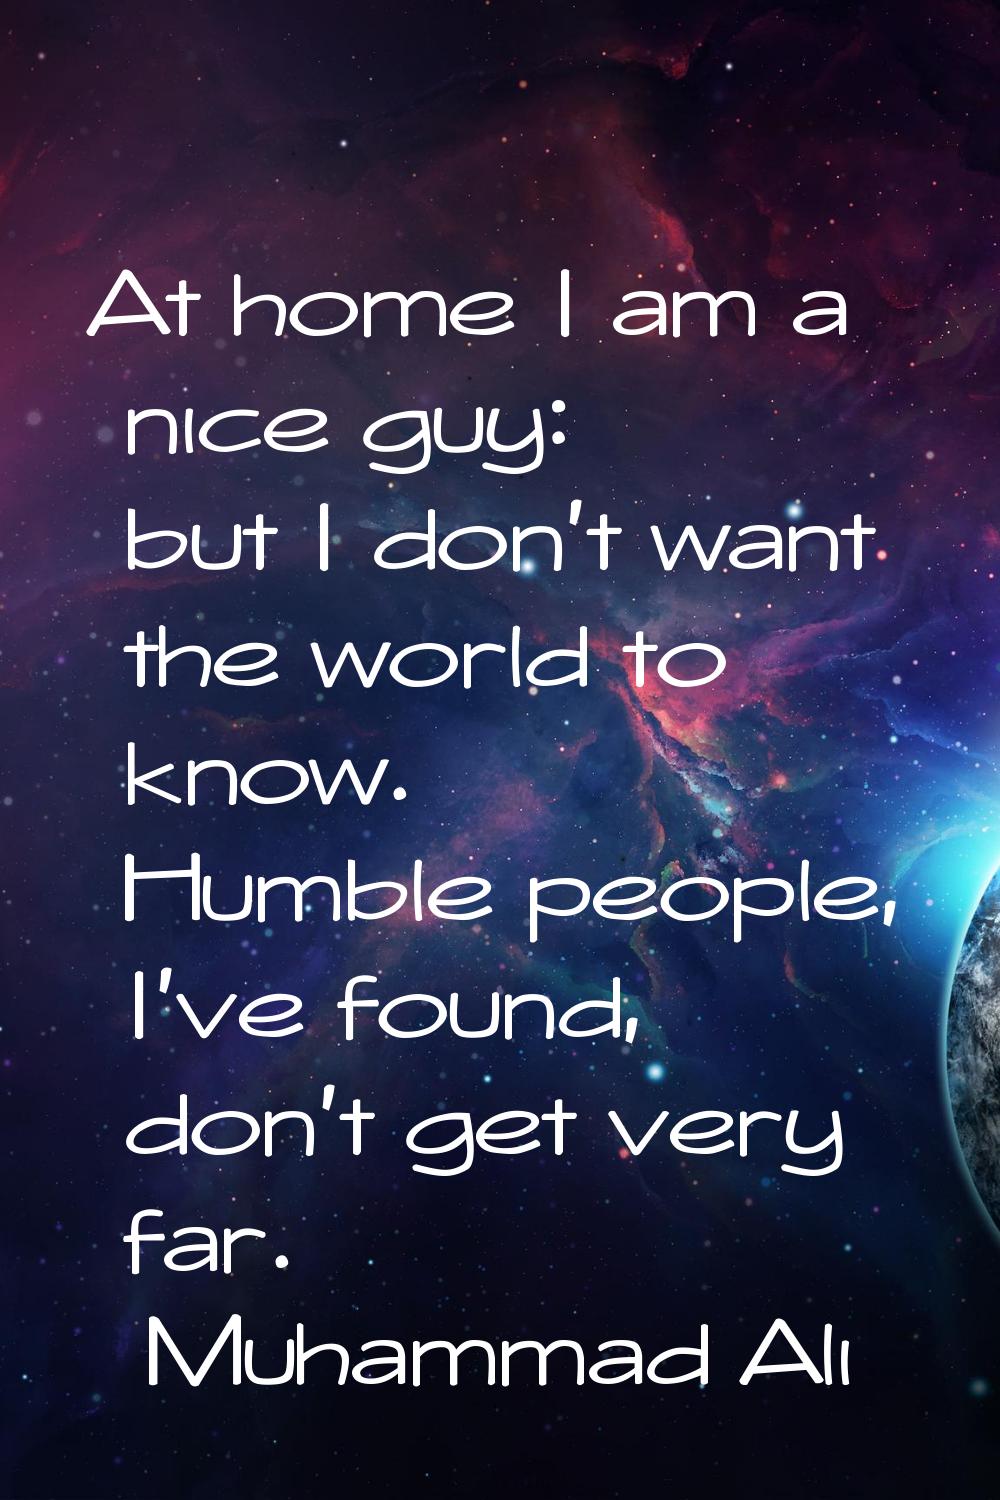 At home I am a nice guy: but I don't want the world to know. Humble people, I've found, don't get v